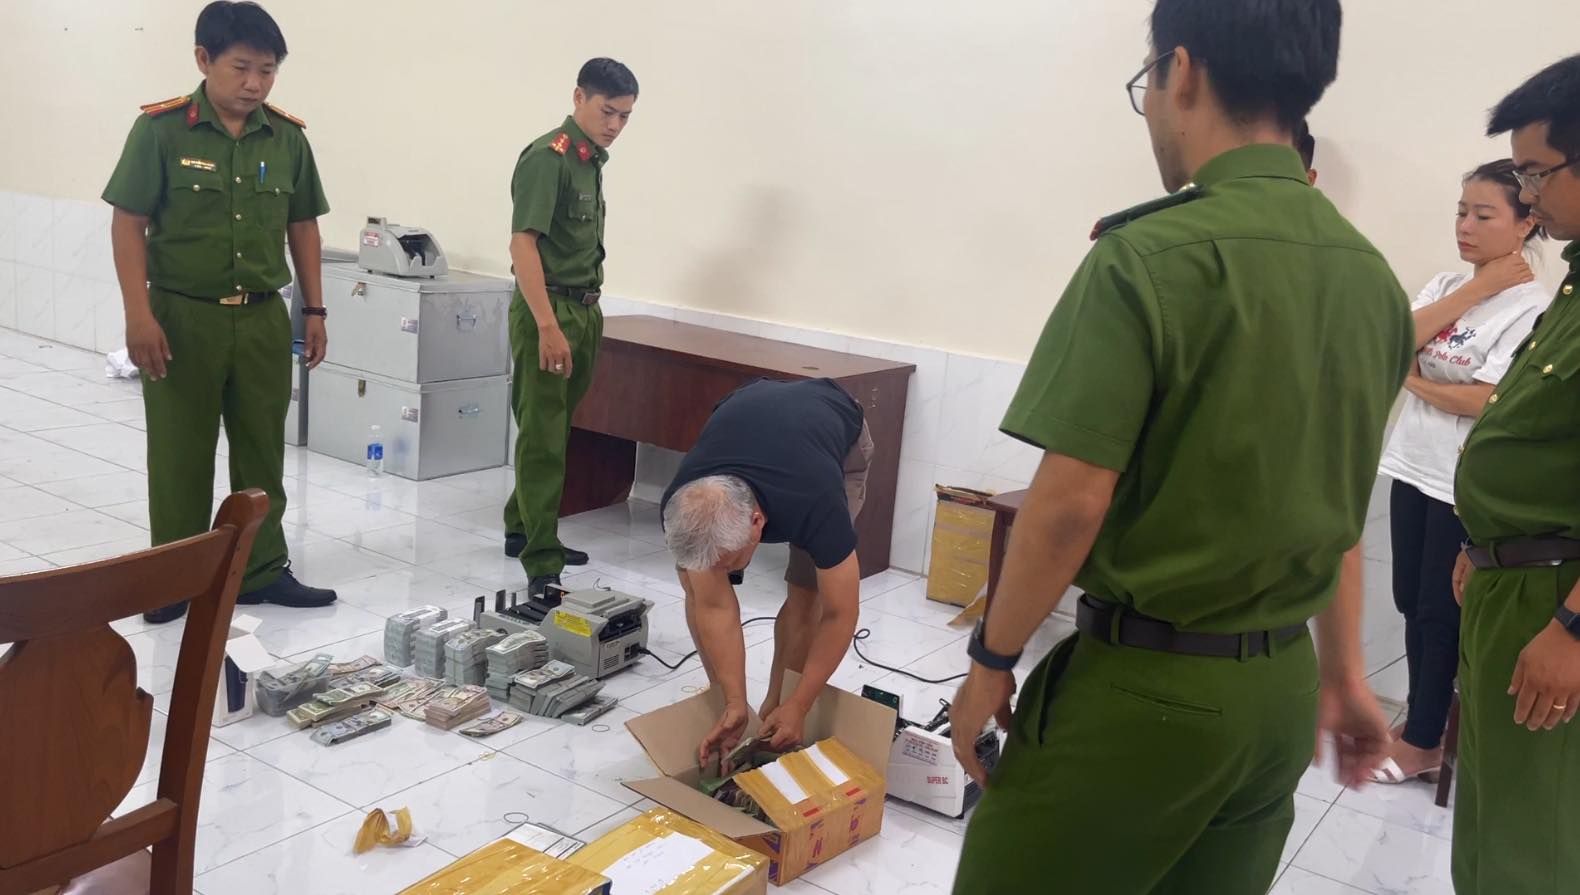 Nigerian man, his wife and 11 others arrested in Vietnam for alleged money laundrey